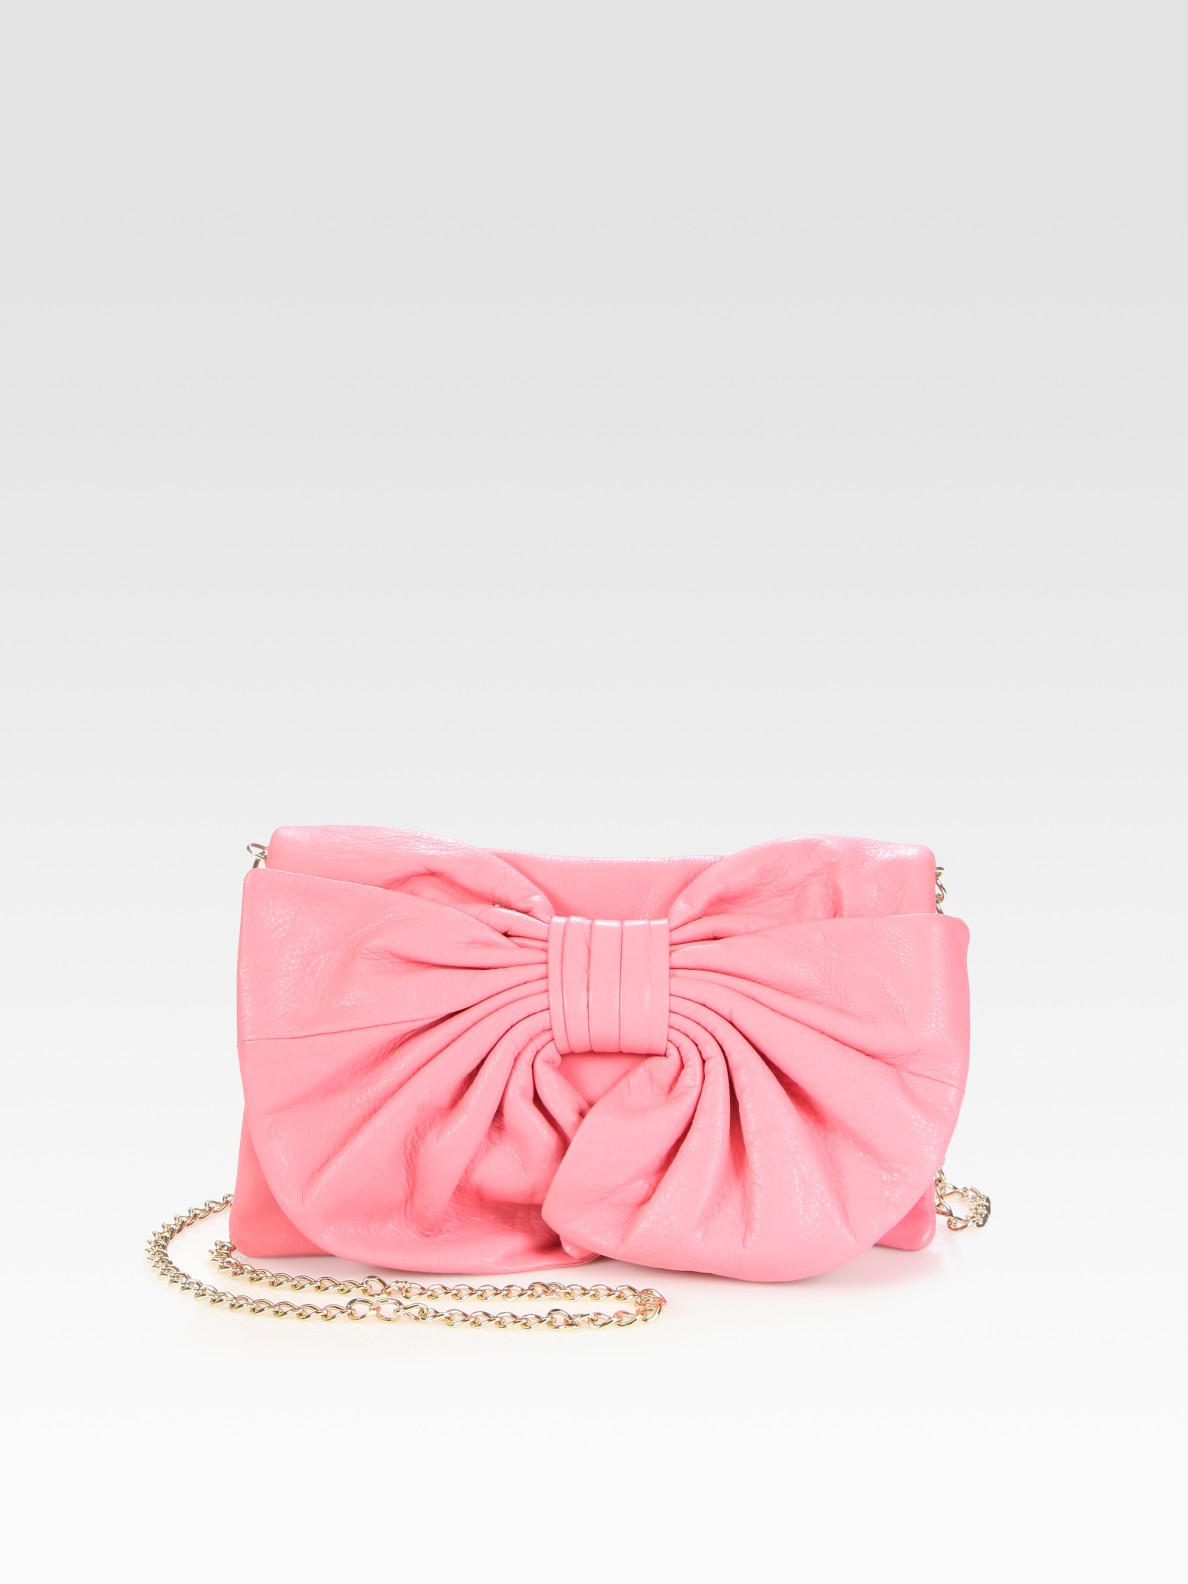 RED Valentino Bow & Chain Strap Shoulder Bag in Pink - Lyst